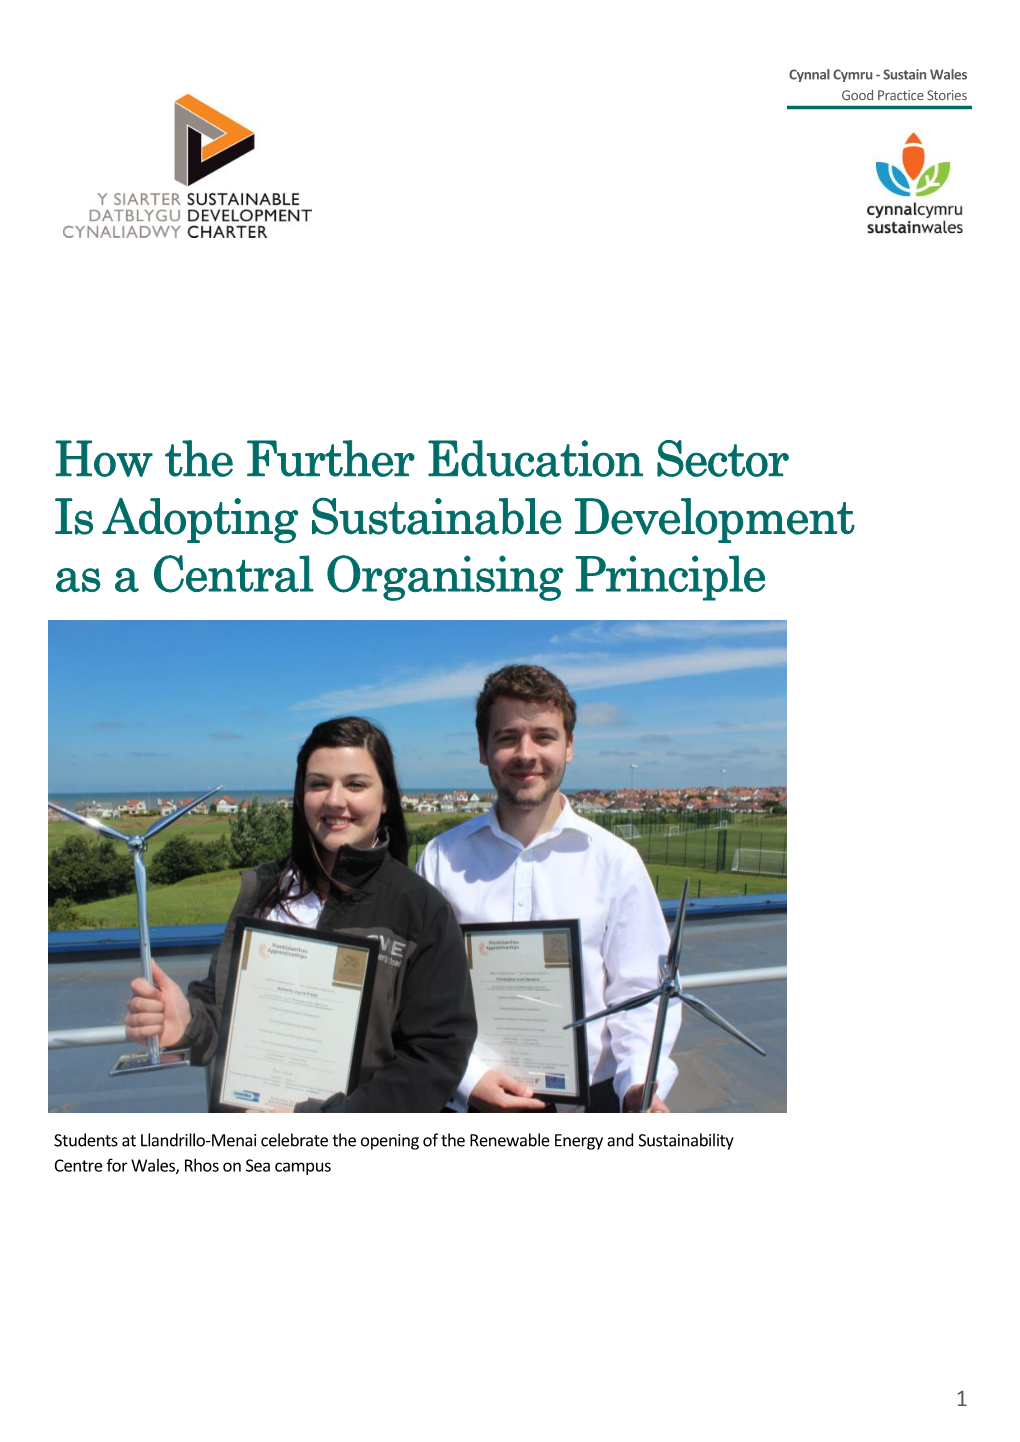 How the Further Education Sector Is Adopting Sustainable Development As a Central Organising Principle